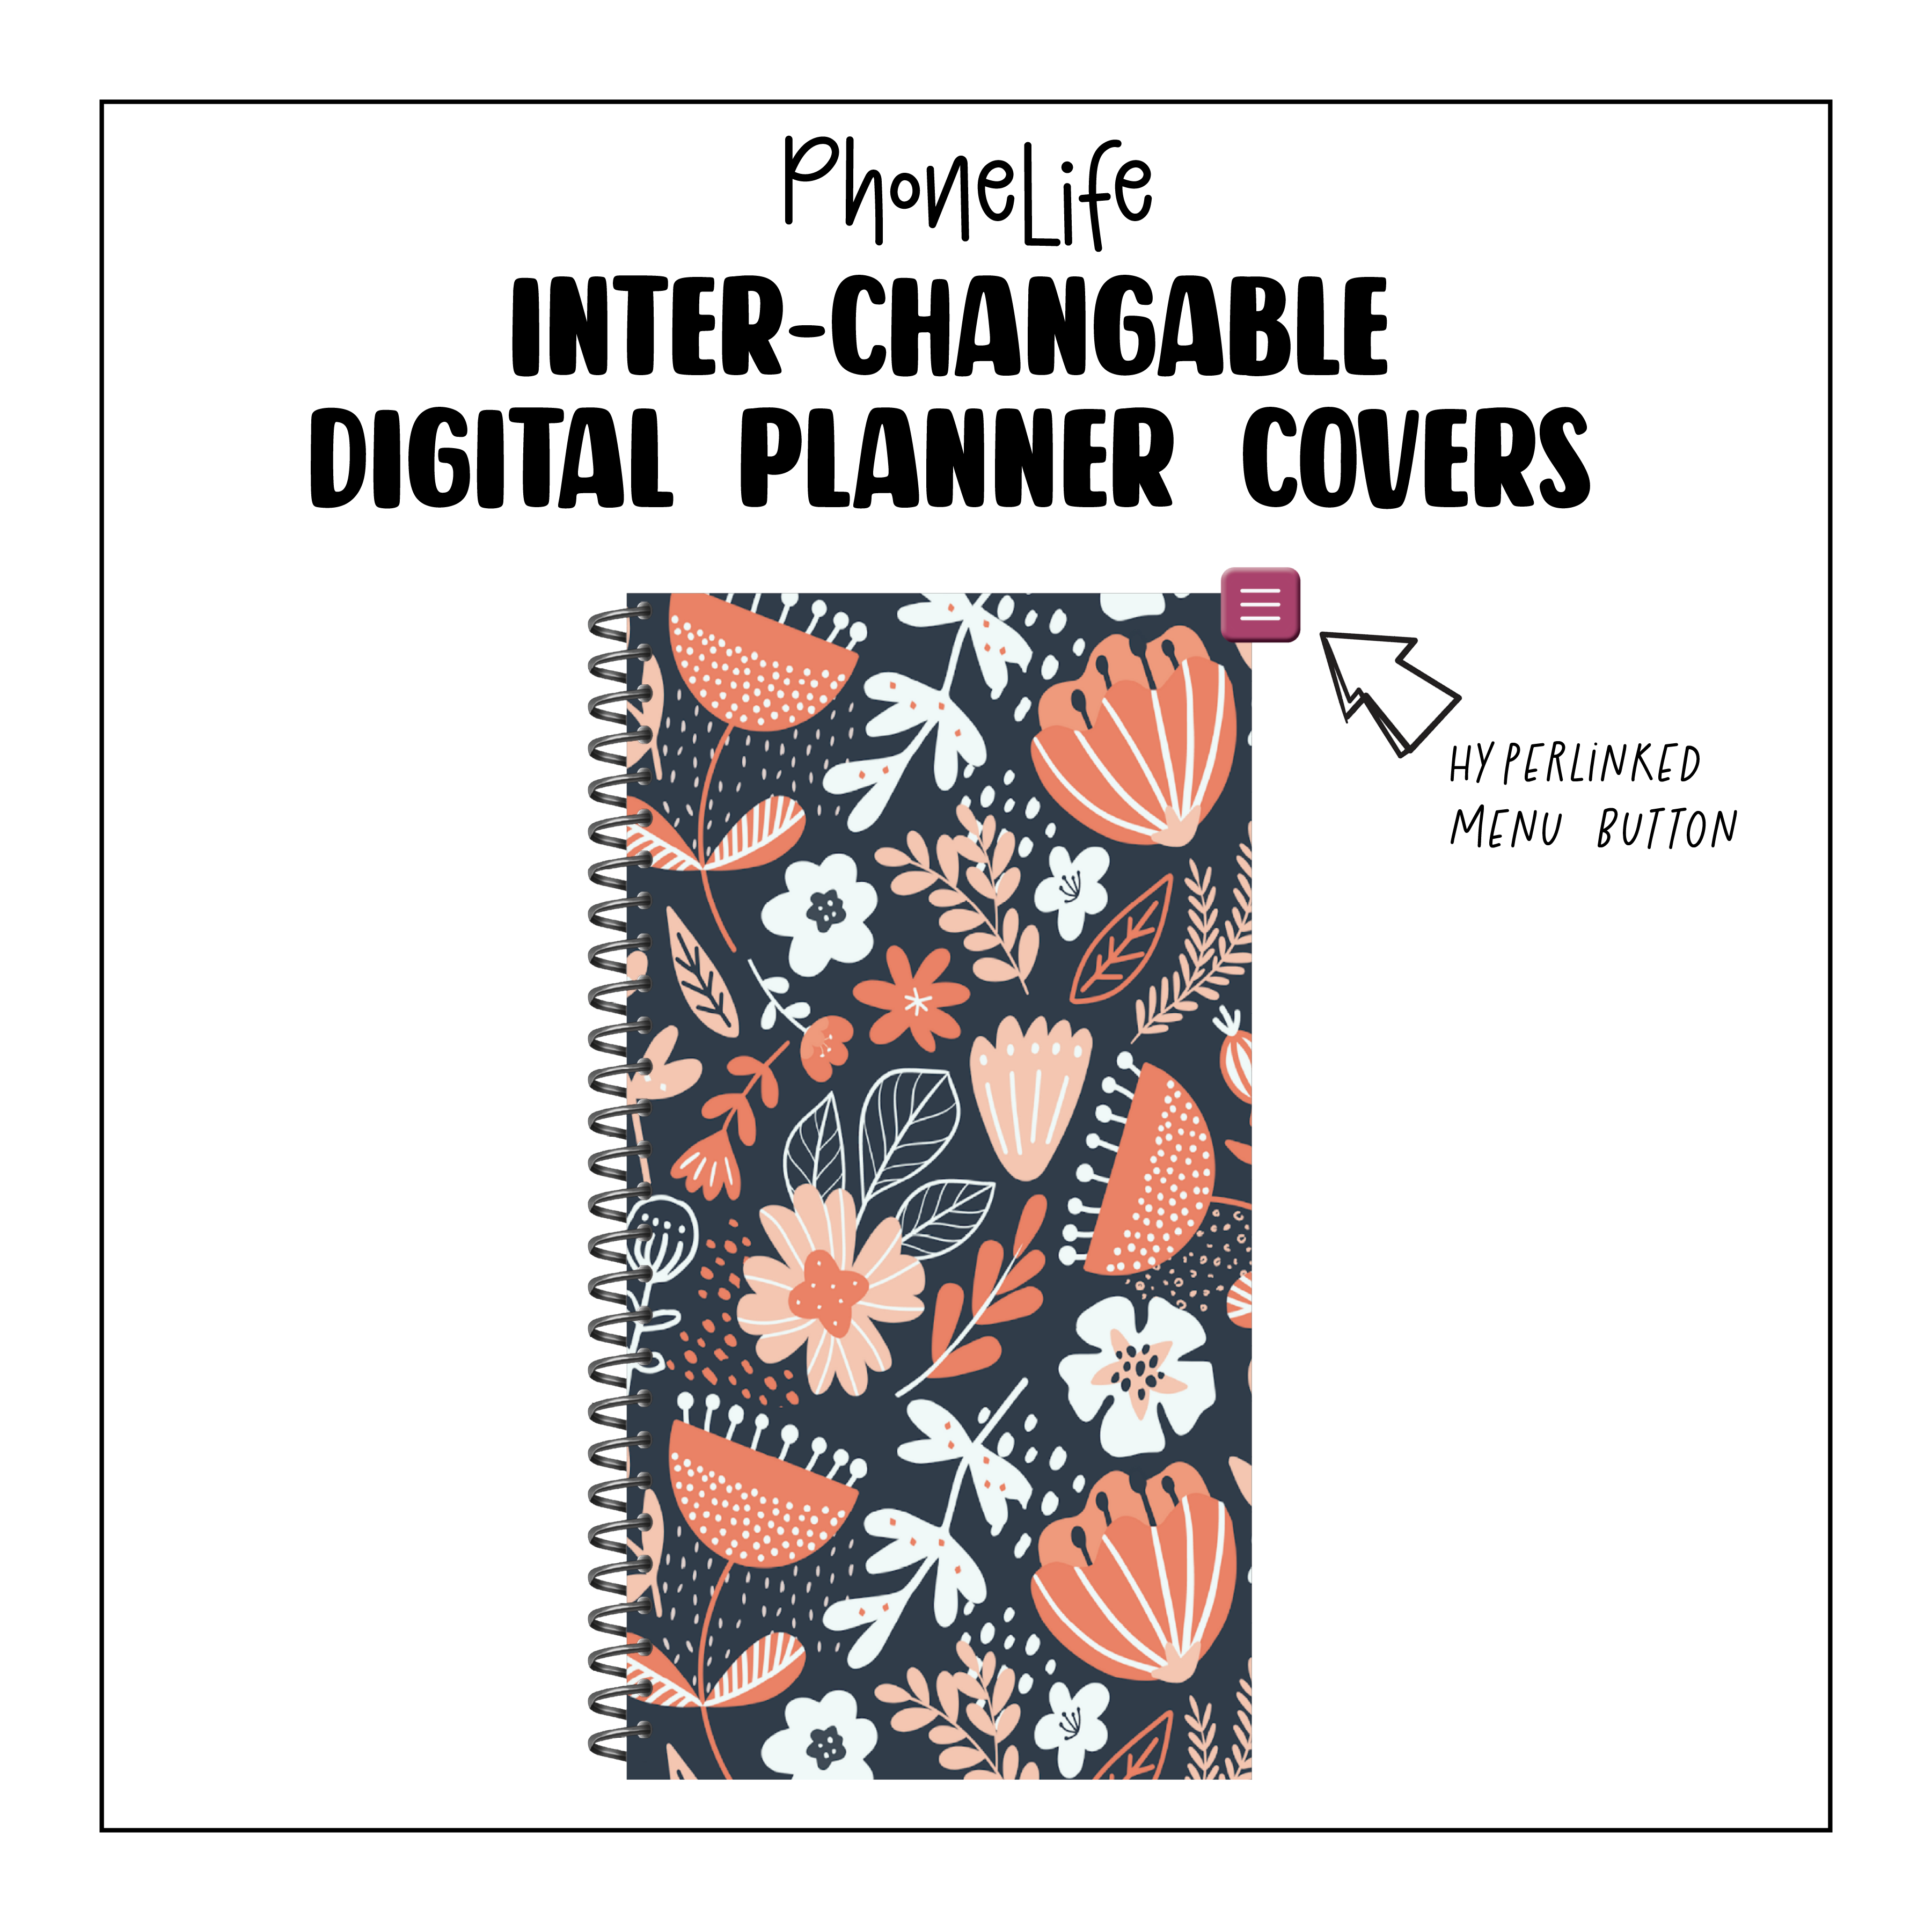 PhoneLife Interchangeable Digital Planner Cover | MIDNIGHT BOHO BLOSSOMS 1